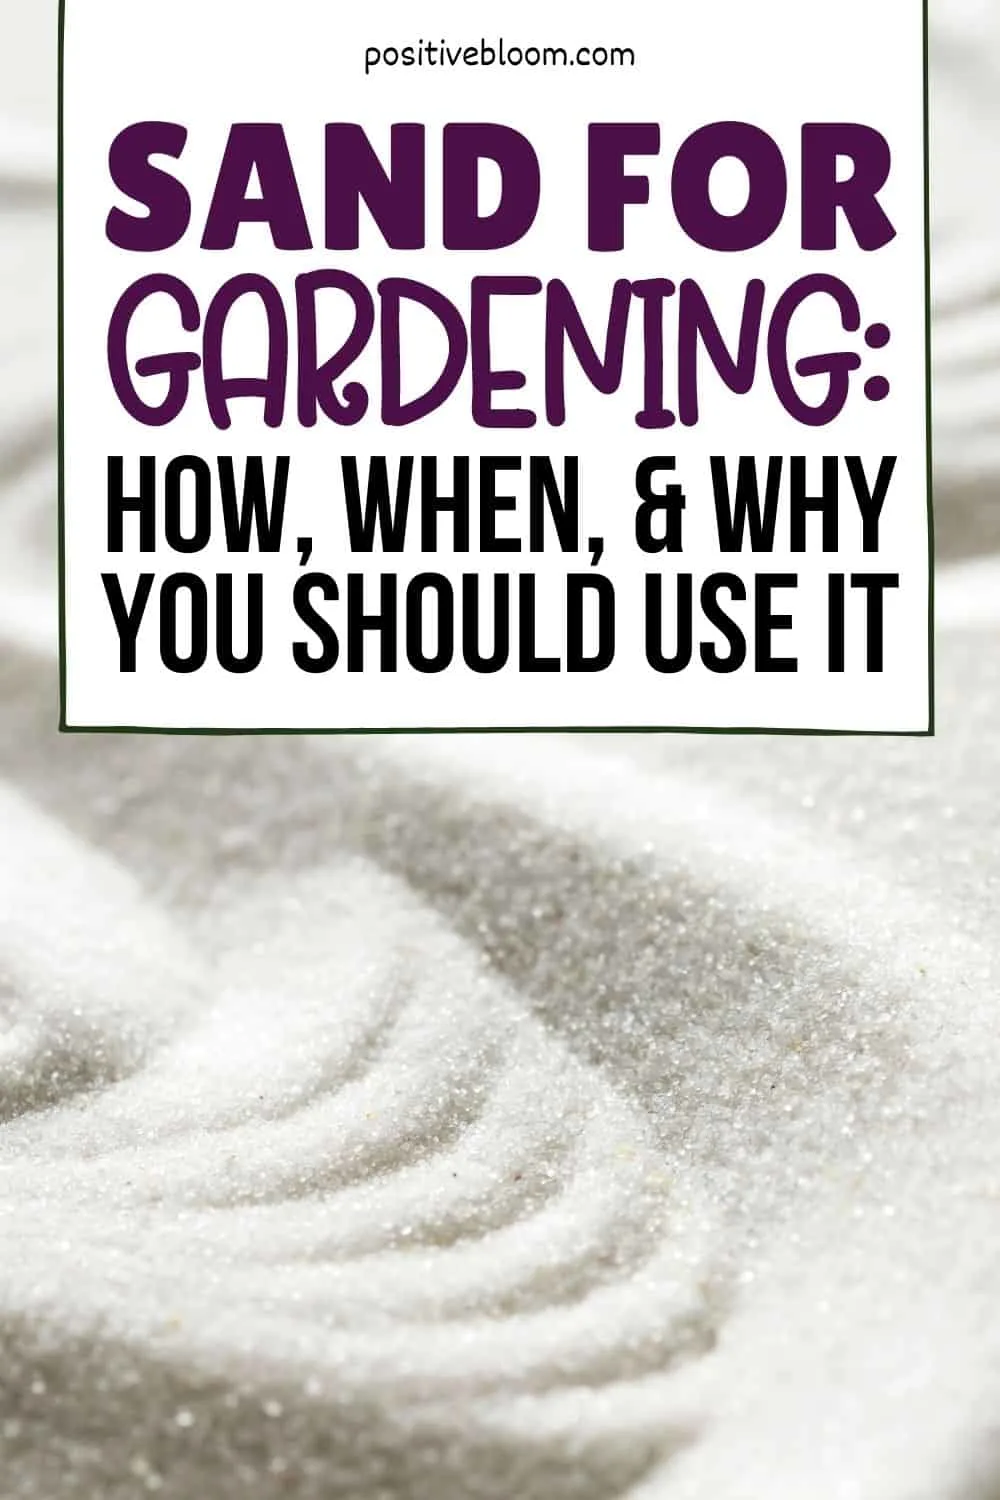 Sand For Gardening How, When, & Why You Should Use It Pinterest